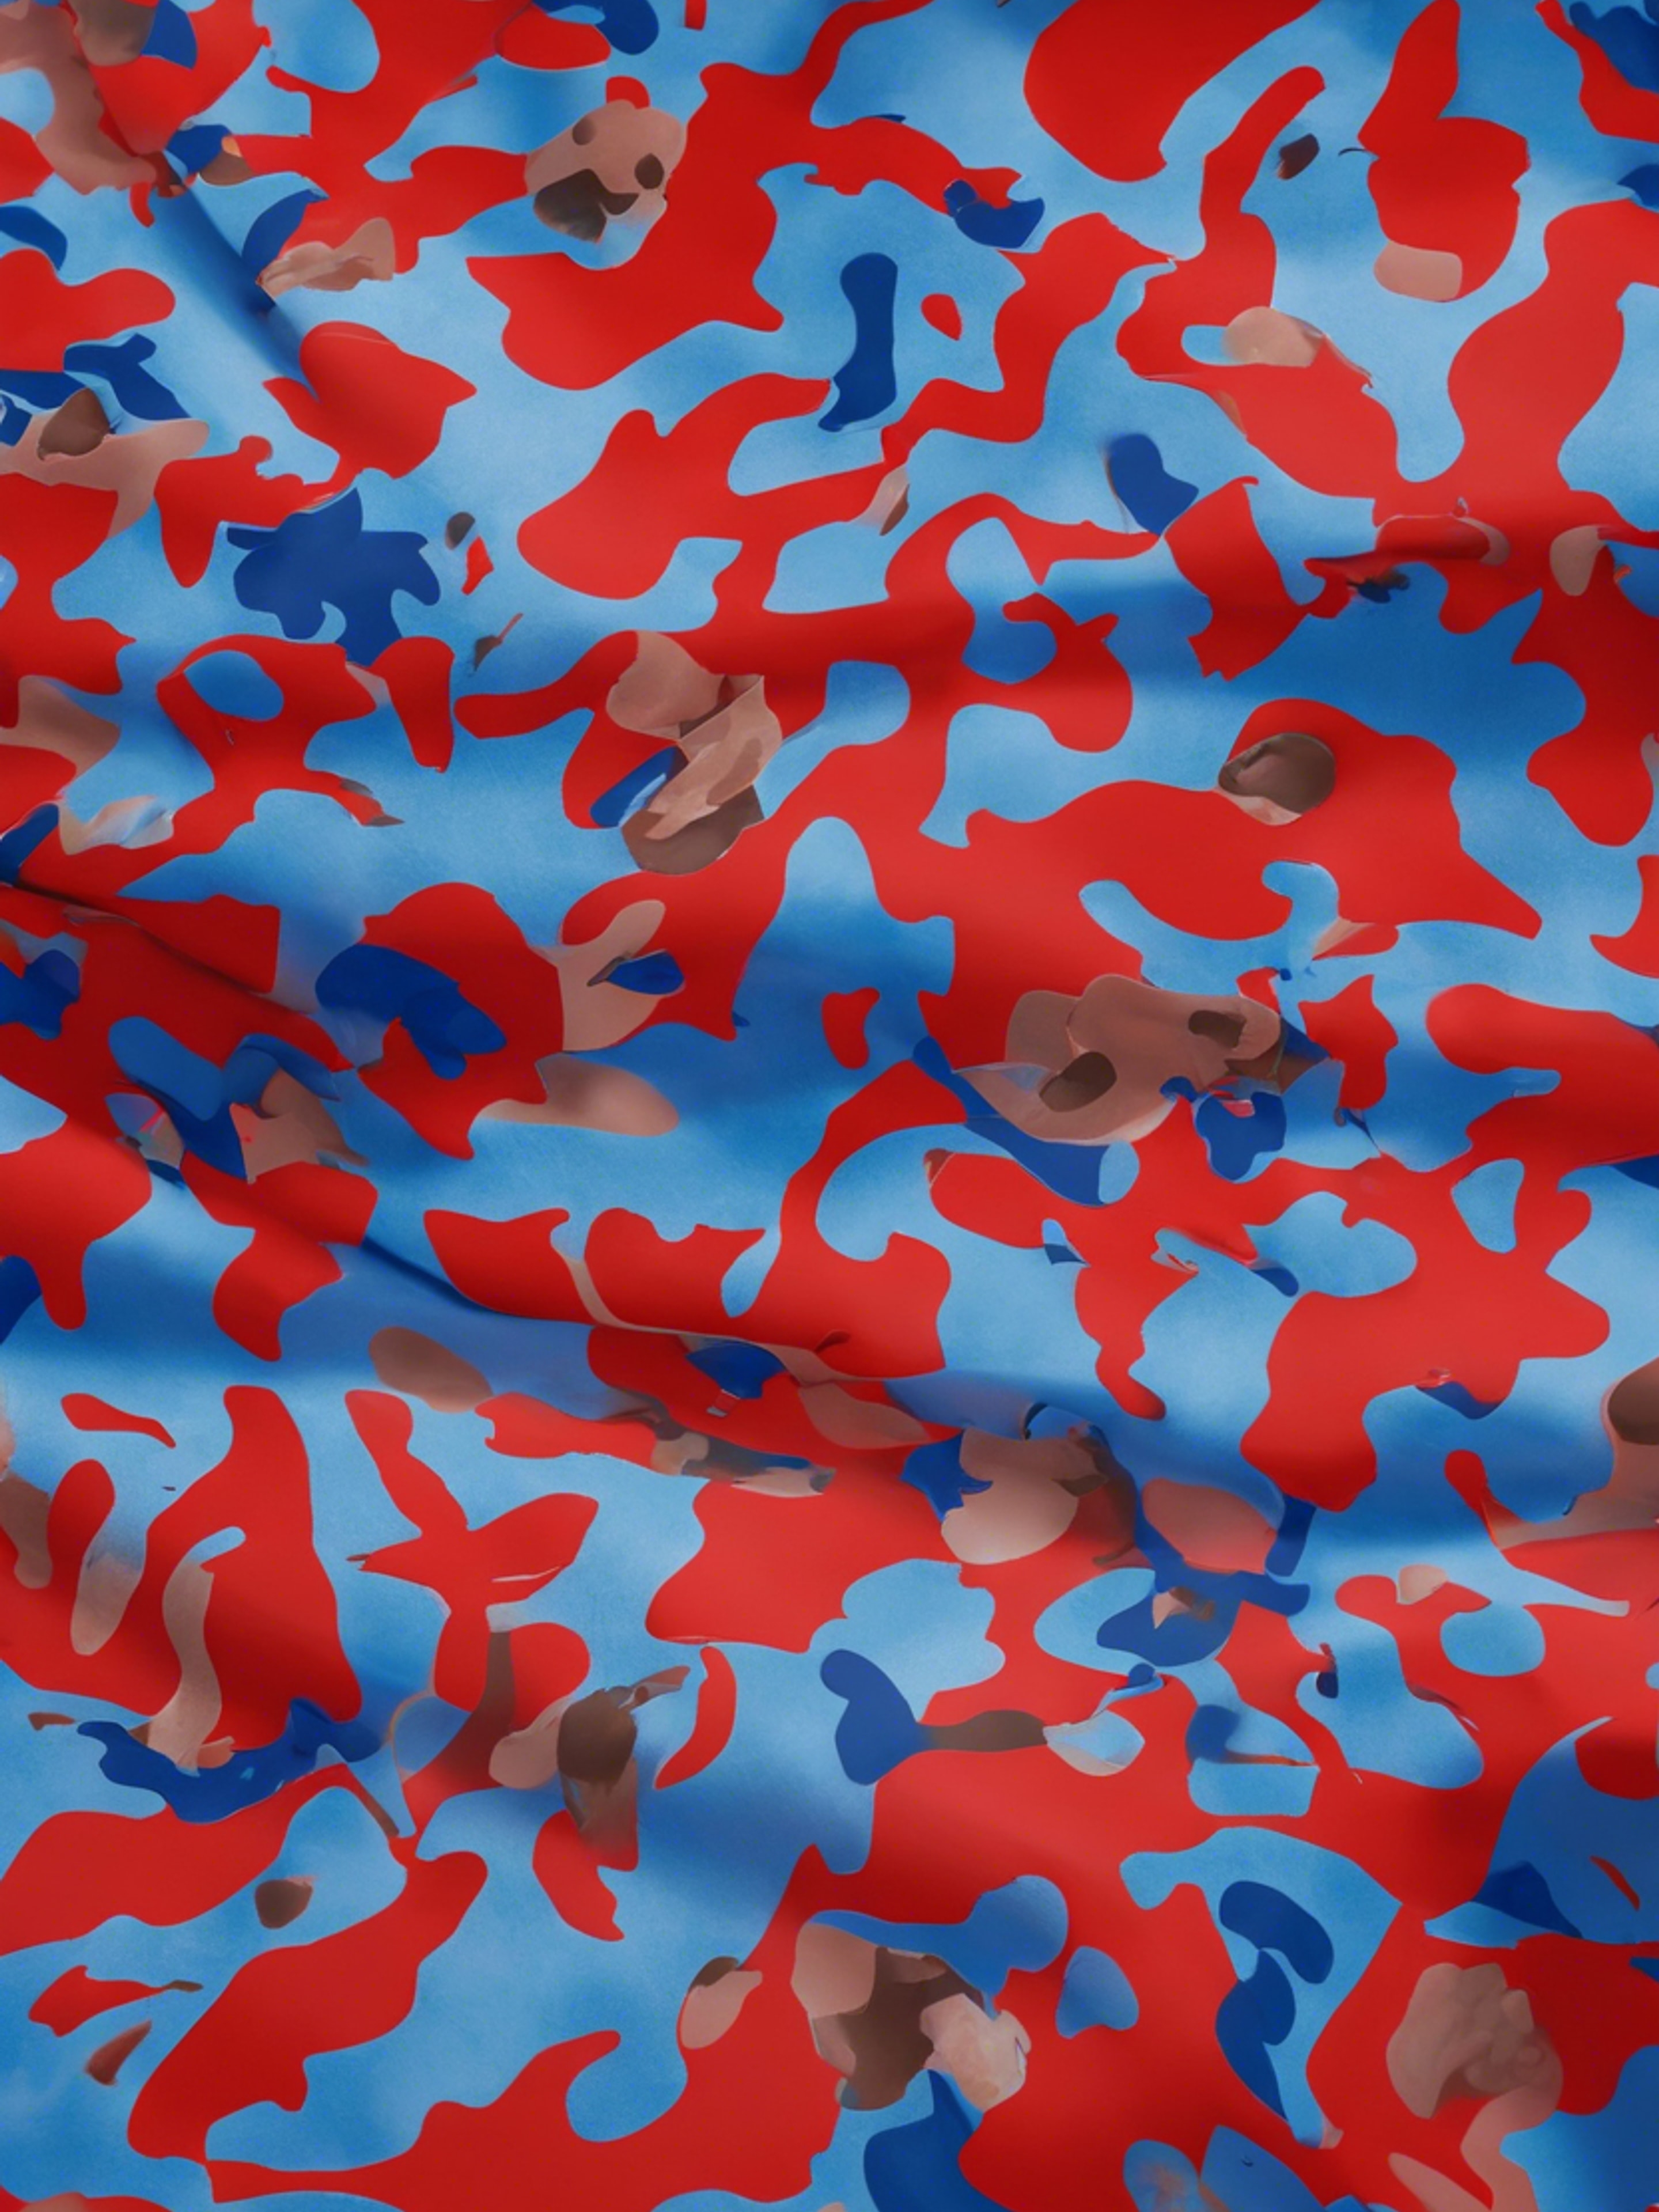 High-quality red and blue camouflage wrapping paper. Tapeta[4b47f7d82a744ca8b045]